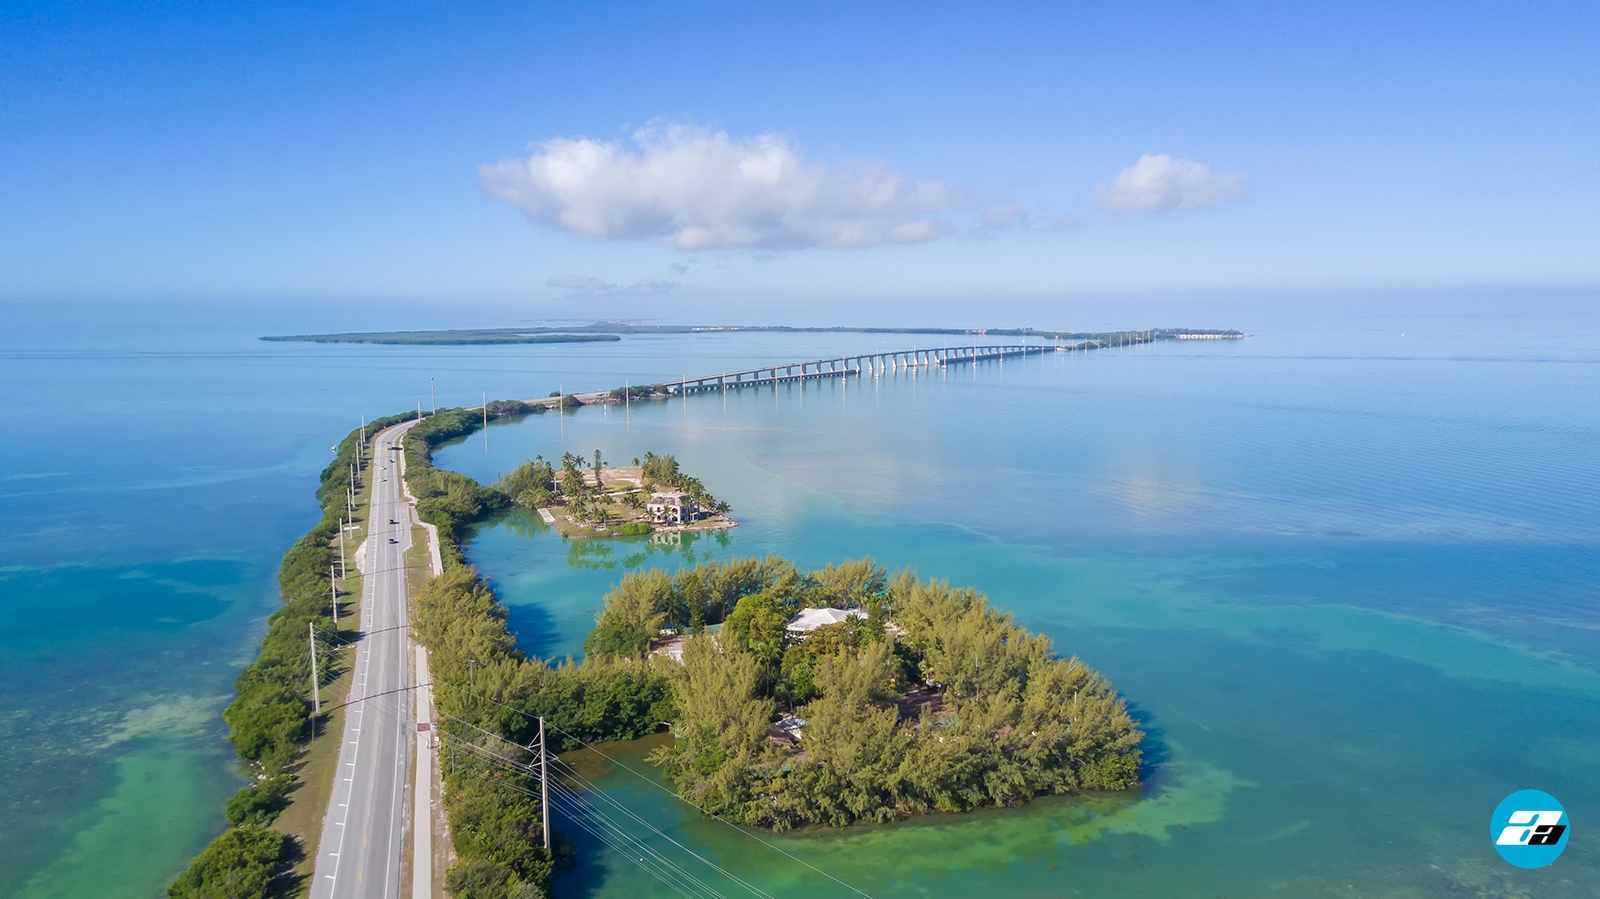 Overseas Highway, FL USA. Road to Key West. Aerial View